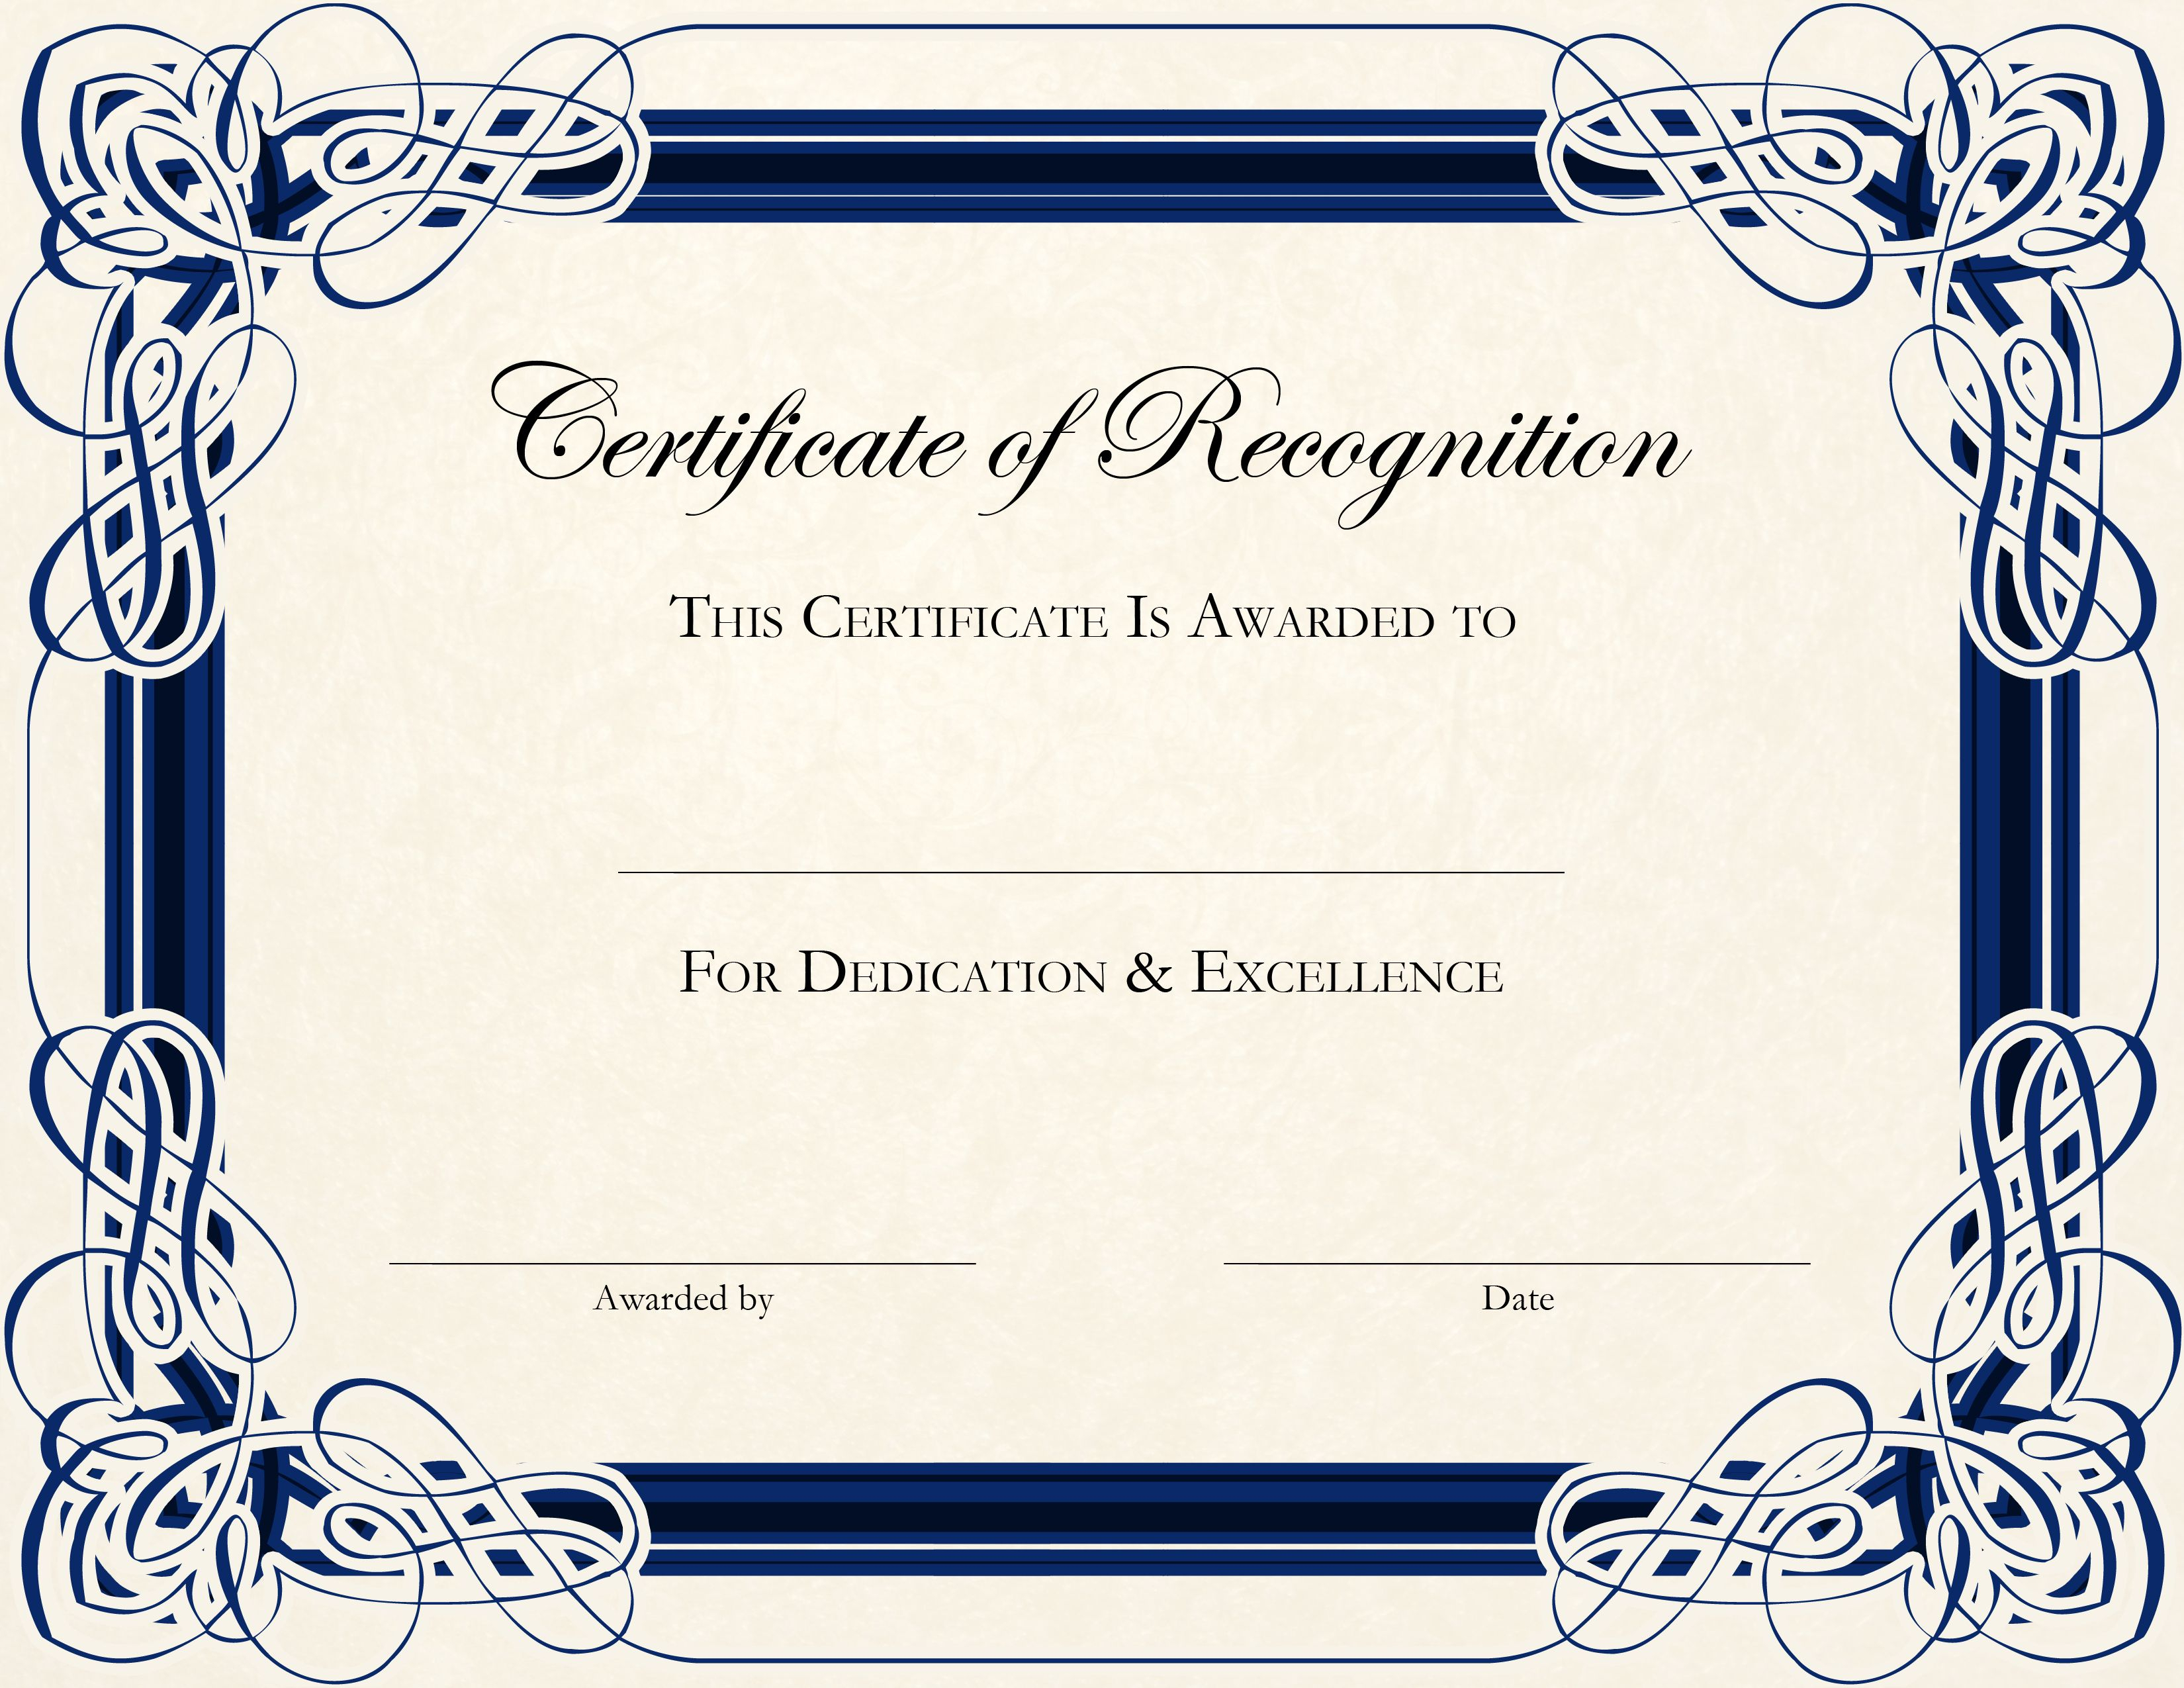 Certificate Template Designs Recognition Docs | Blankets Intended For Free Template For Certificate Of Recognition